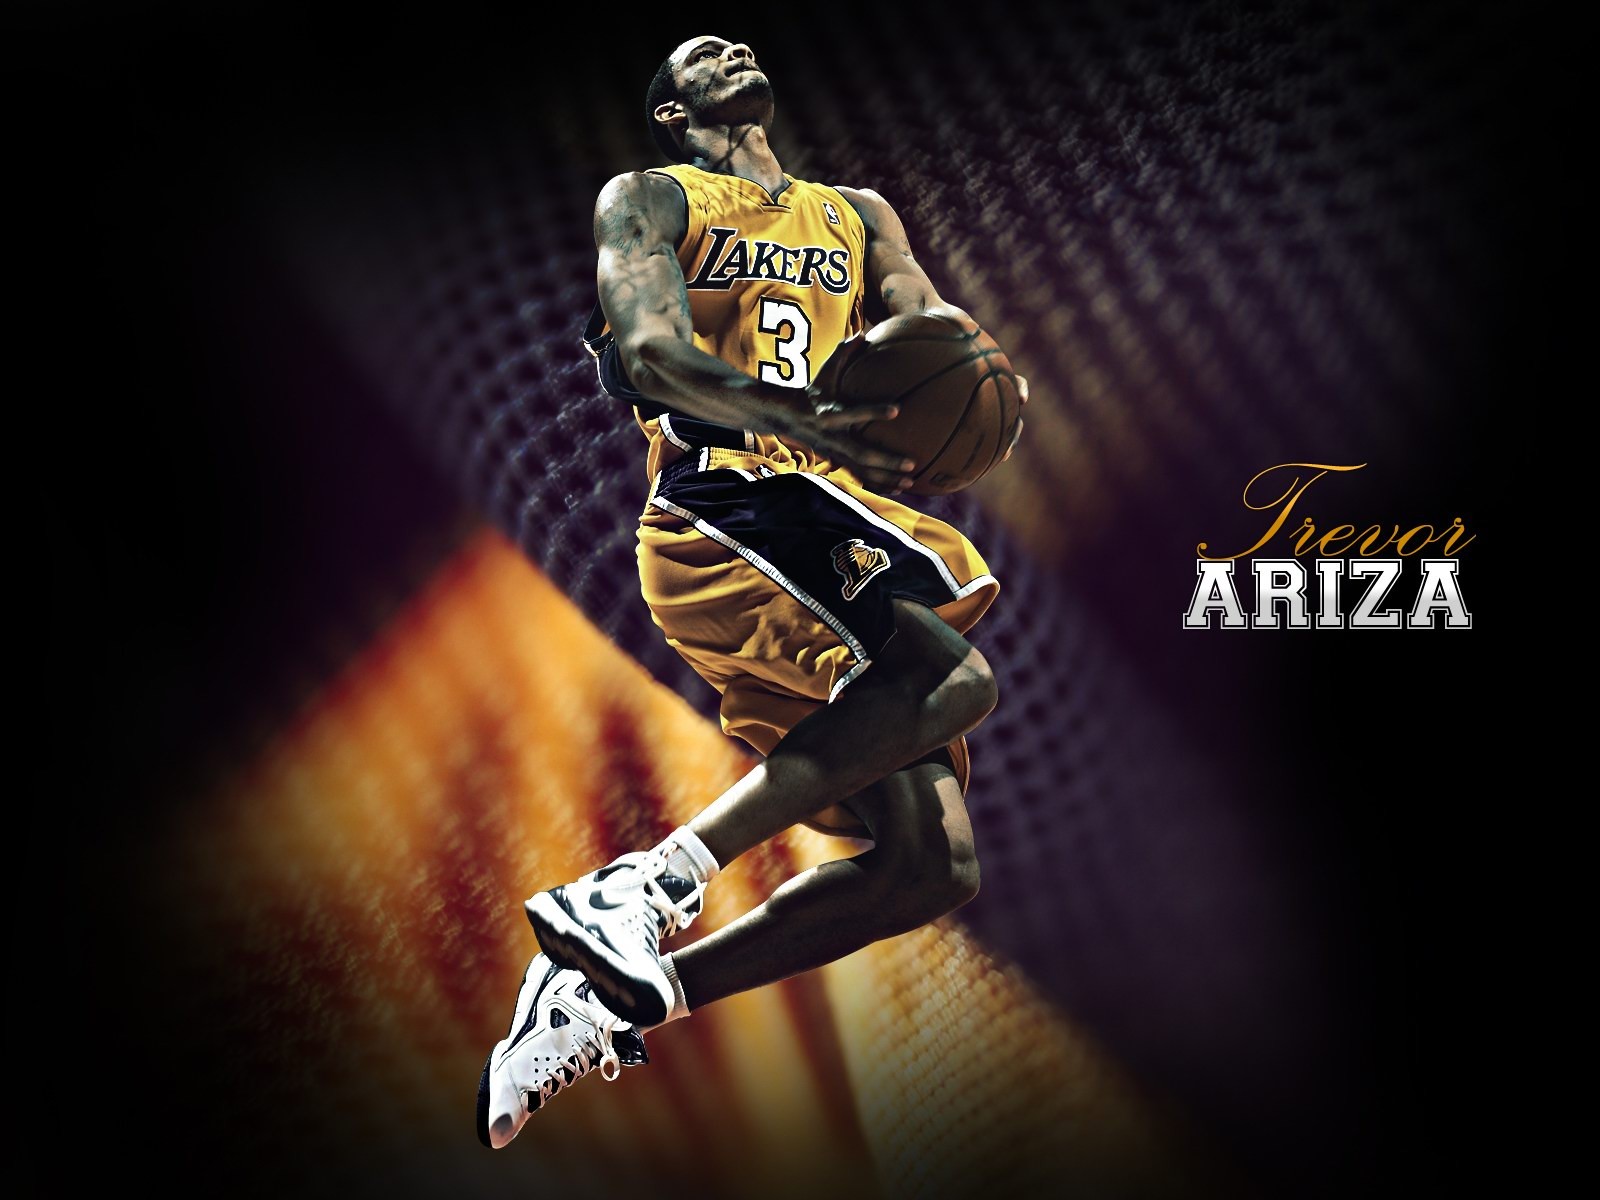 Los Angeles Lakers Wallpaper Oficial #26 - 1600x1200